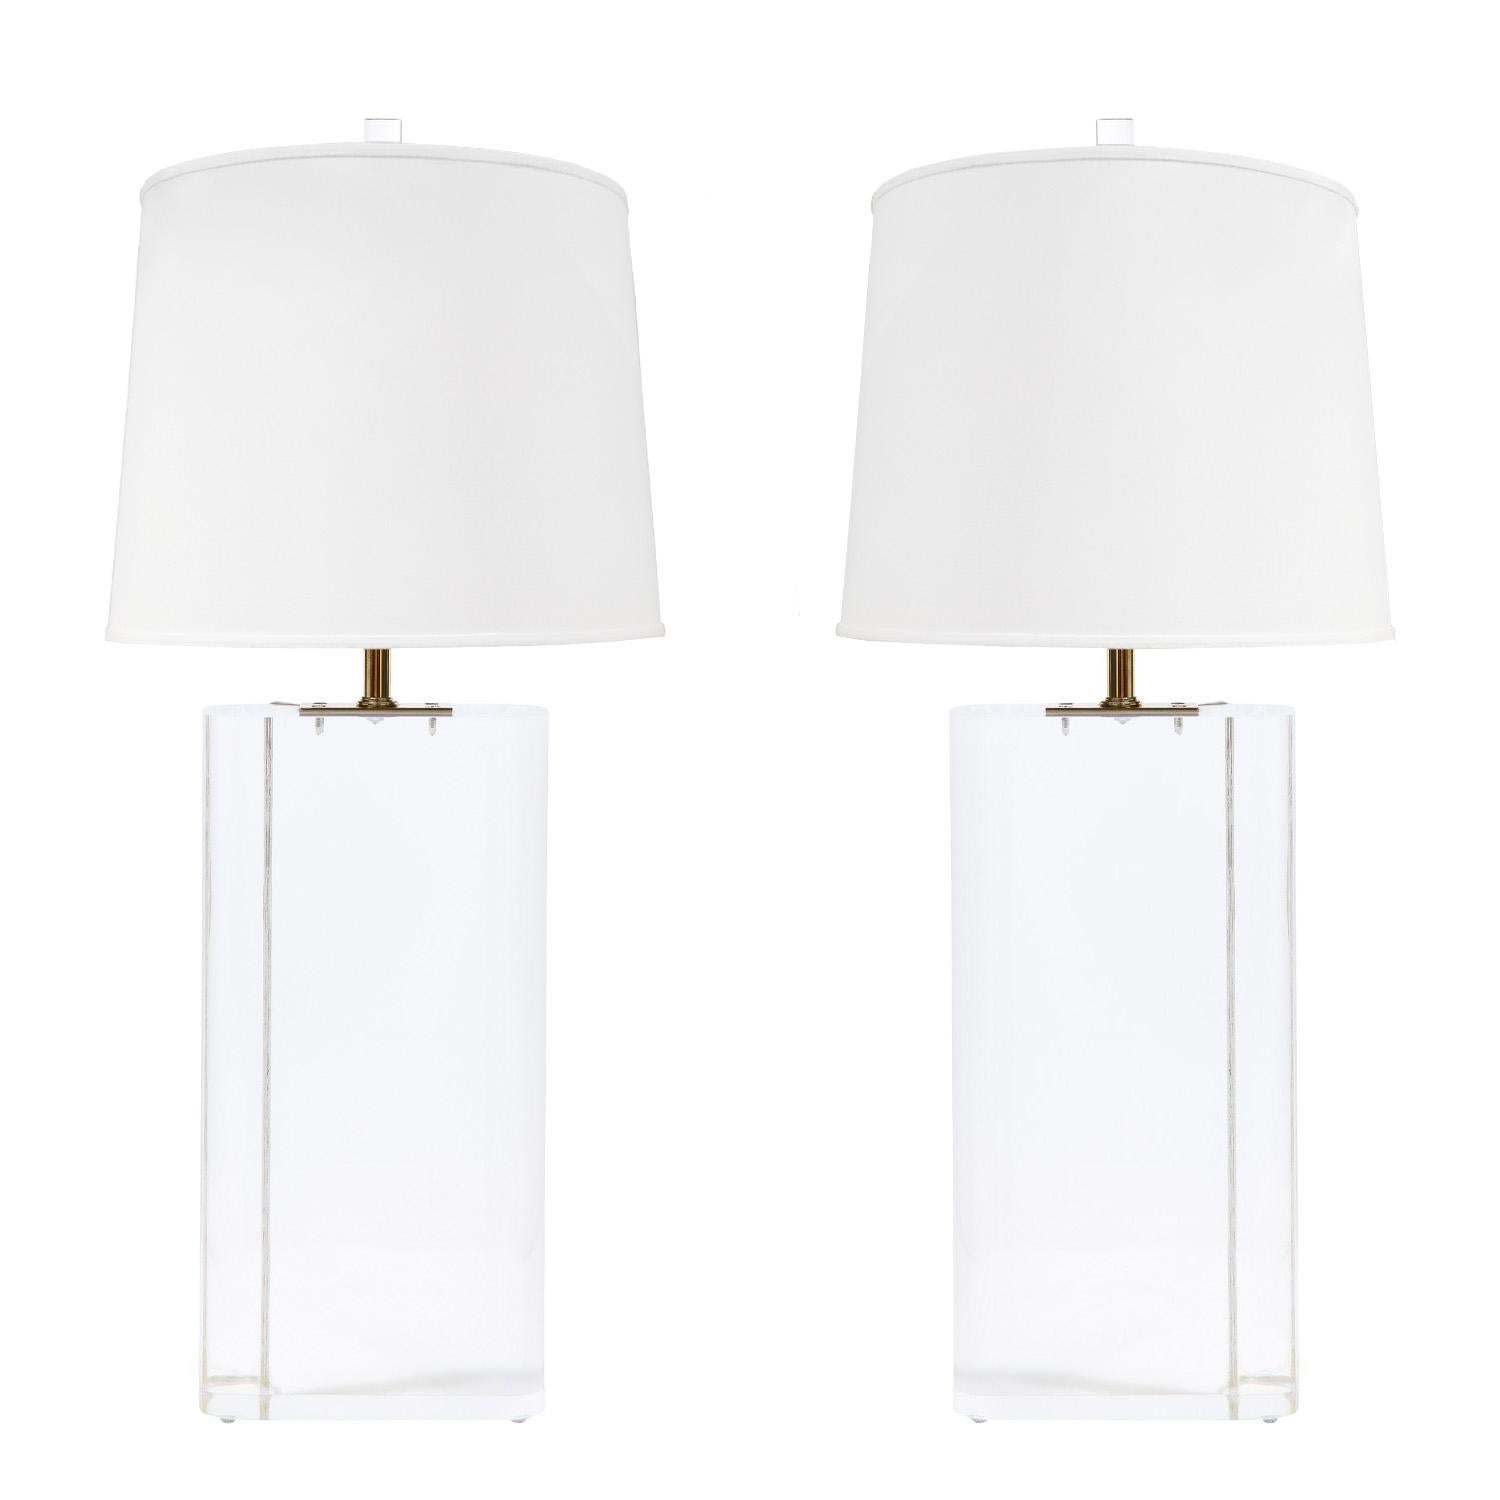 Pair of beautifully made large table lamps, solid clear lucite blocks with radius corners and mounted brass hardware, American 1970's.  Cords are embedded in the lucite blocks. Each lamp with a double socket cluster and adjustable riser to adjust